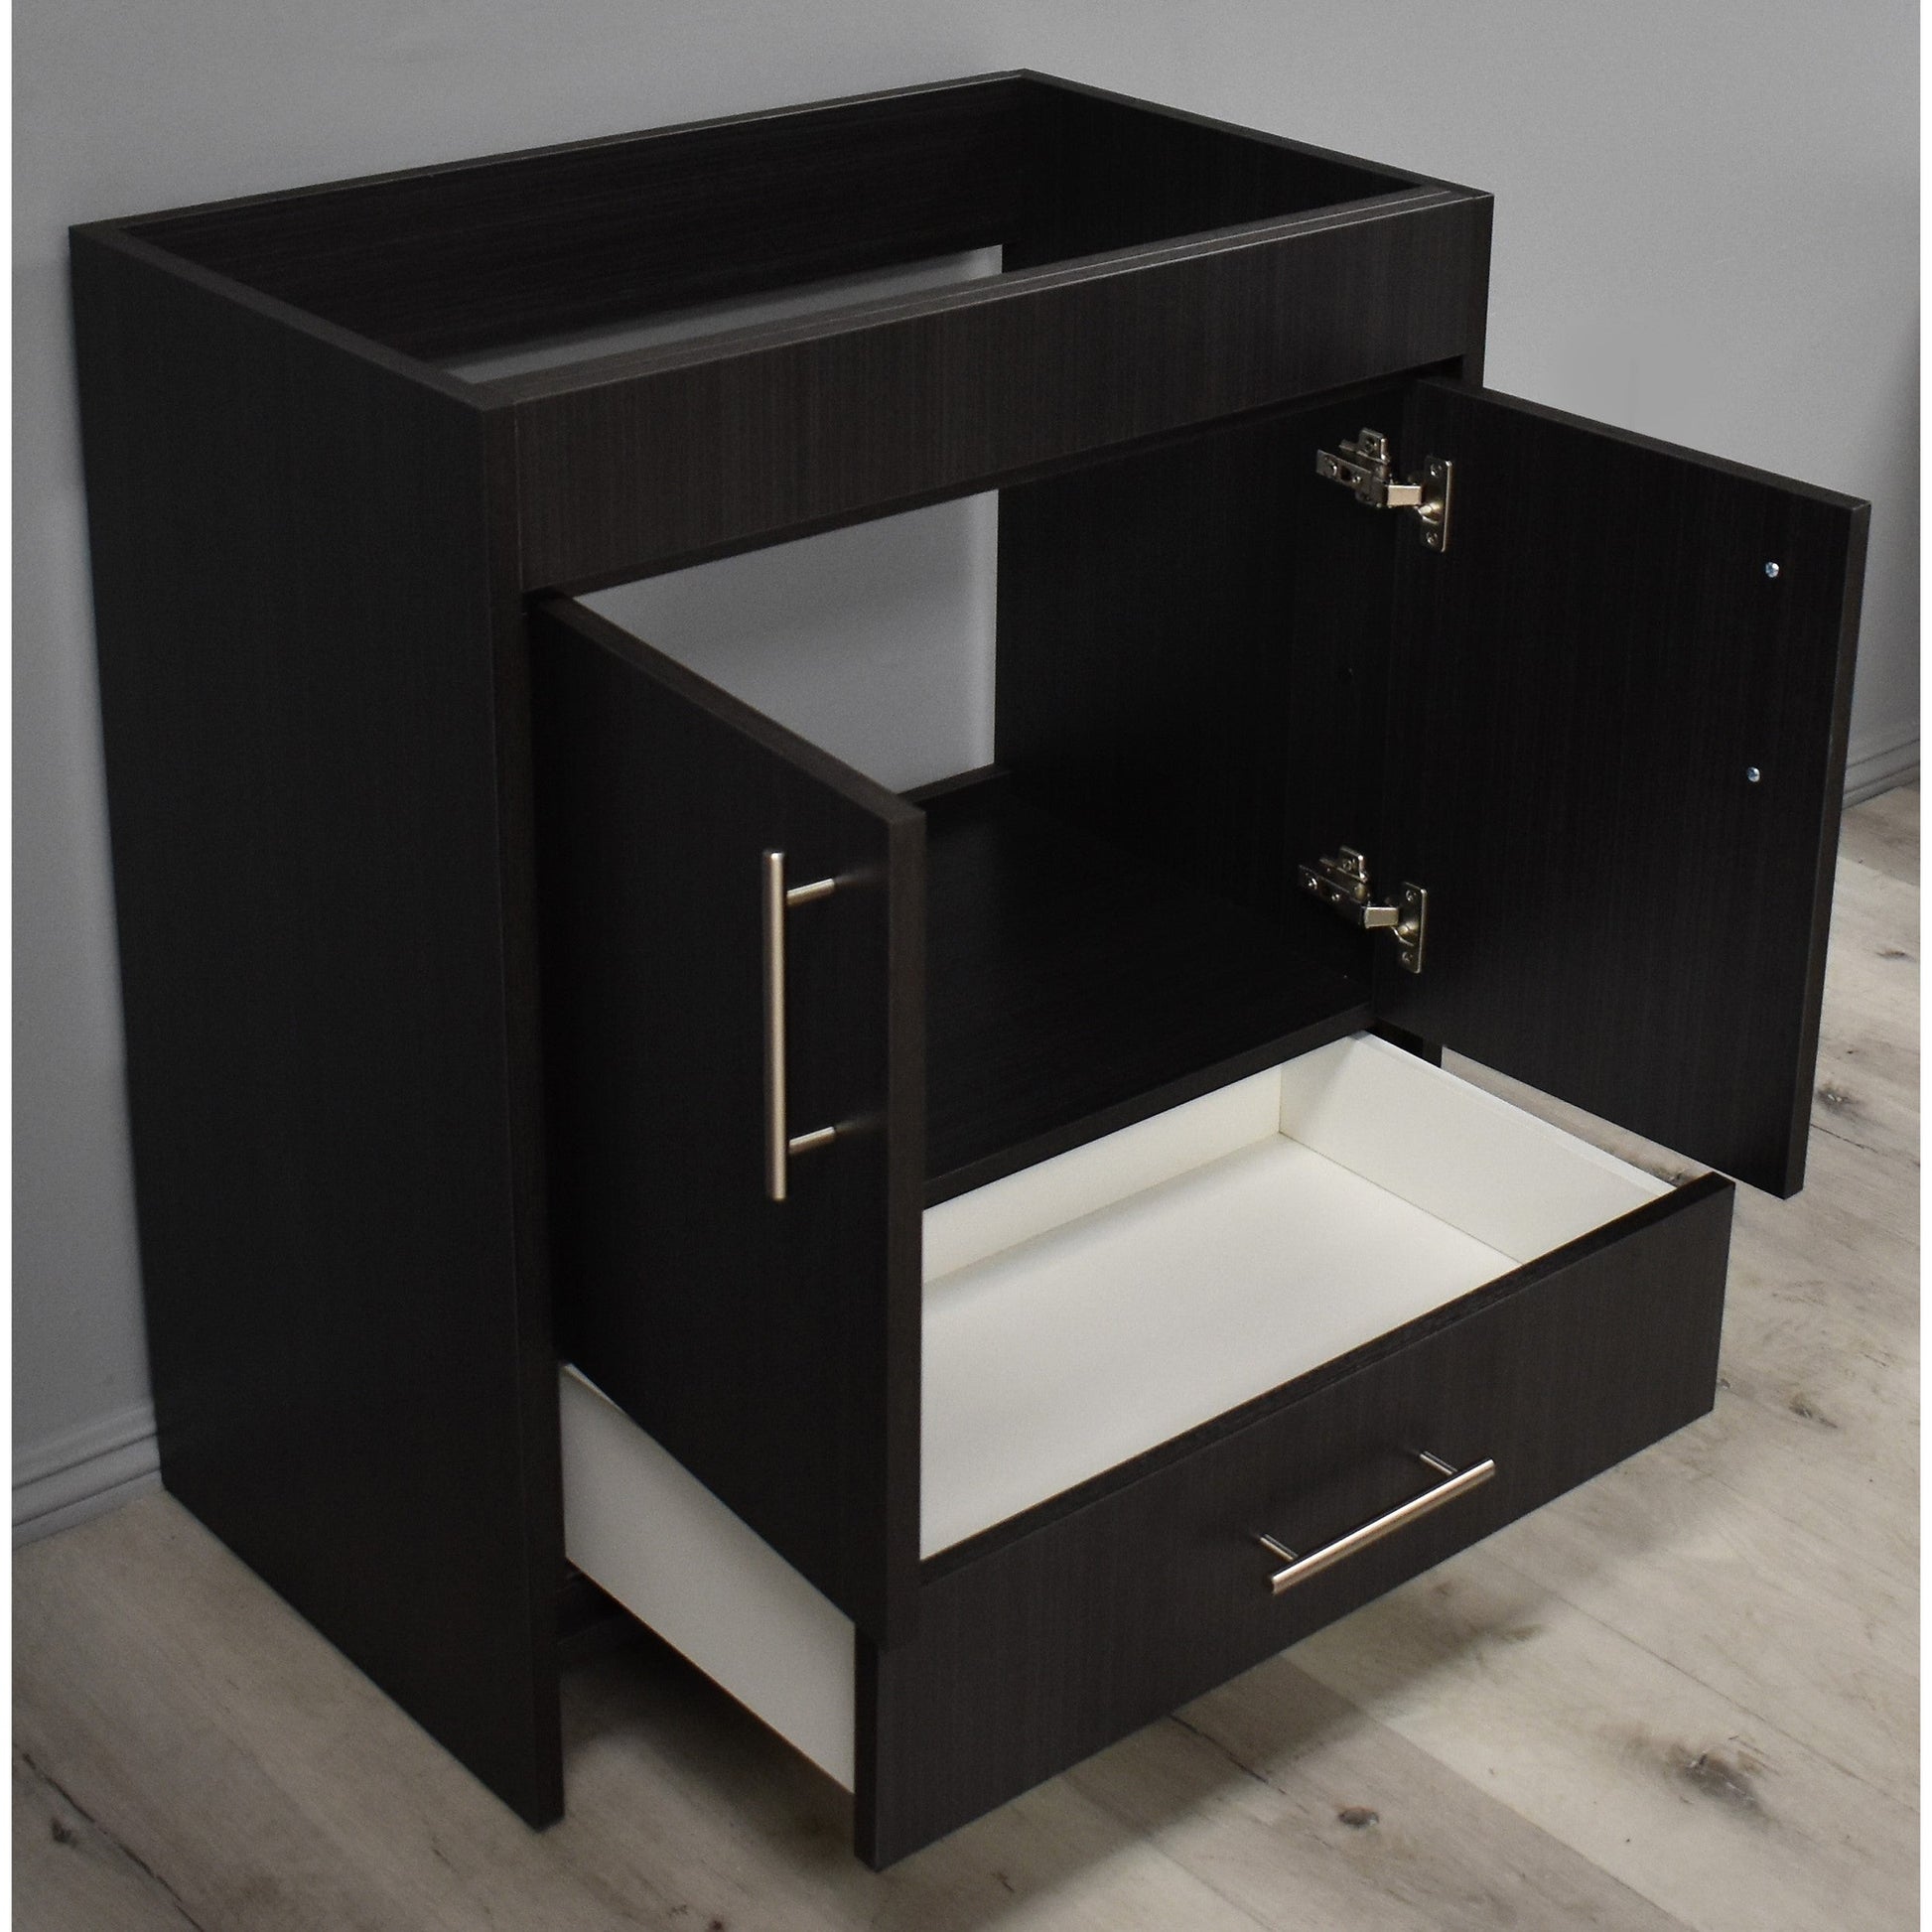 Volpa USA Pacific 30" Black Ash Freestanding Modern Bathroom Vanity With Brushed Nickel Round Handles Cabinet only